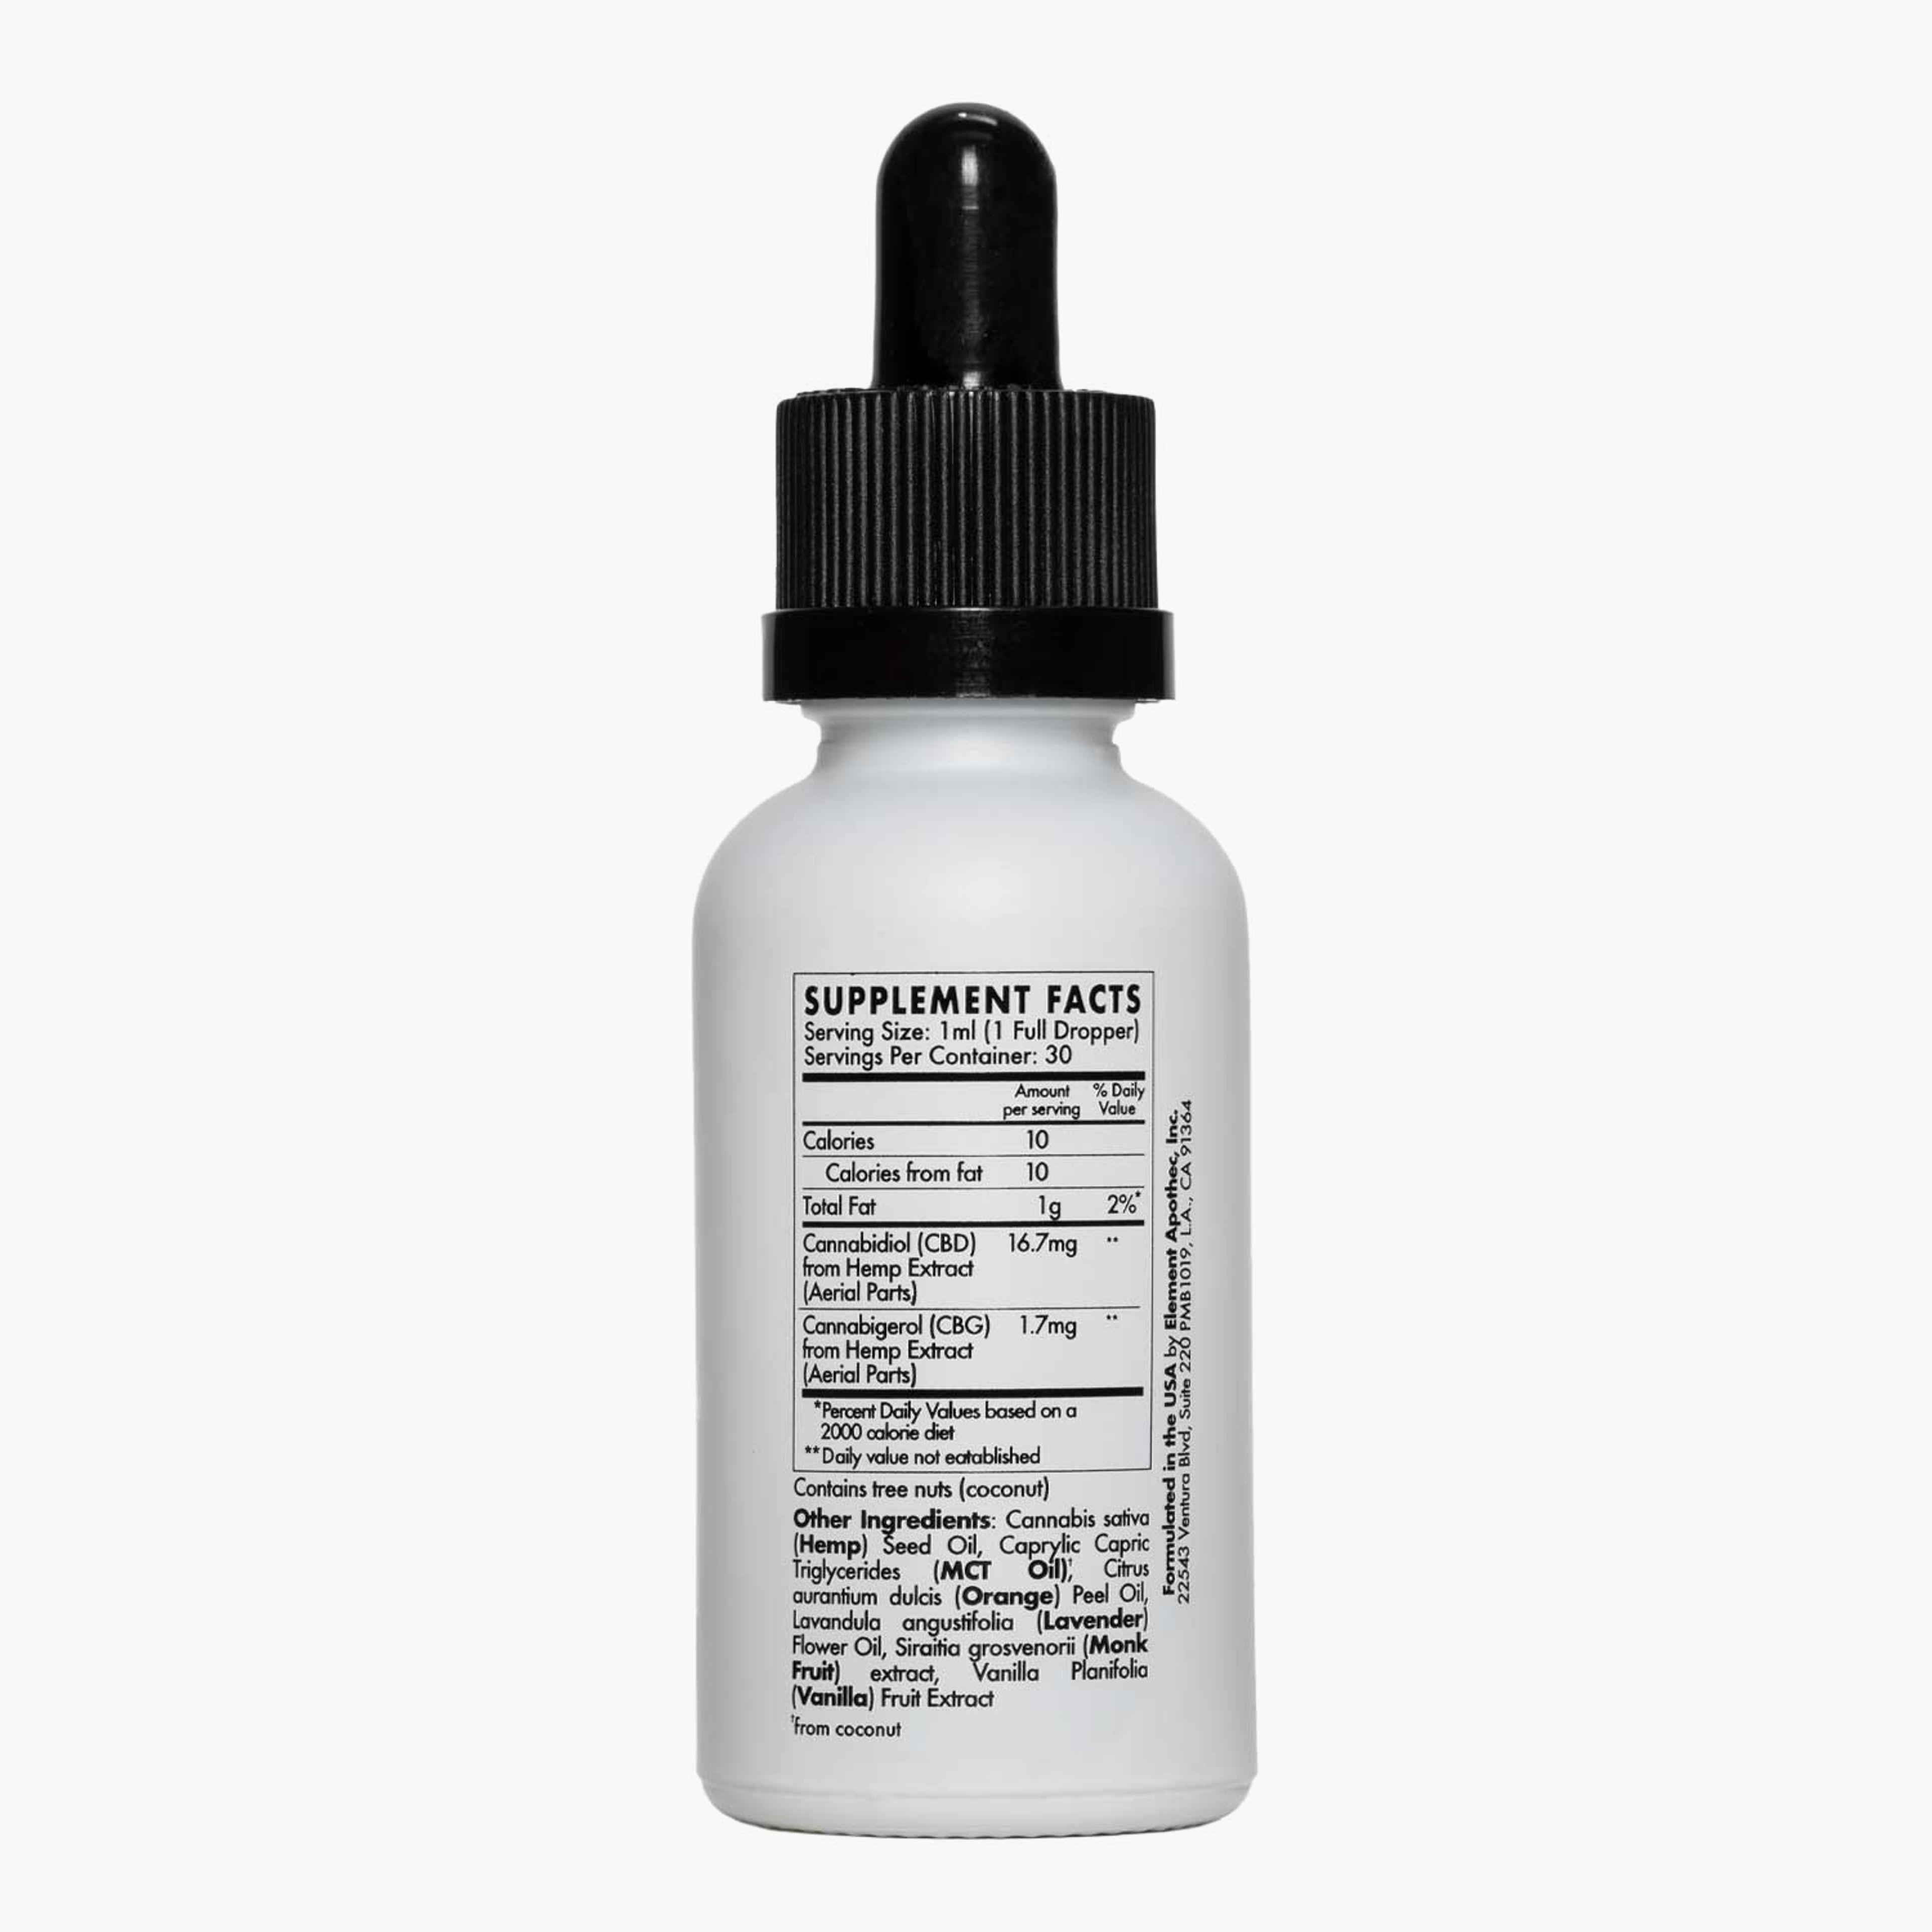 Calm Cool Collected | Tincture 500mg